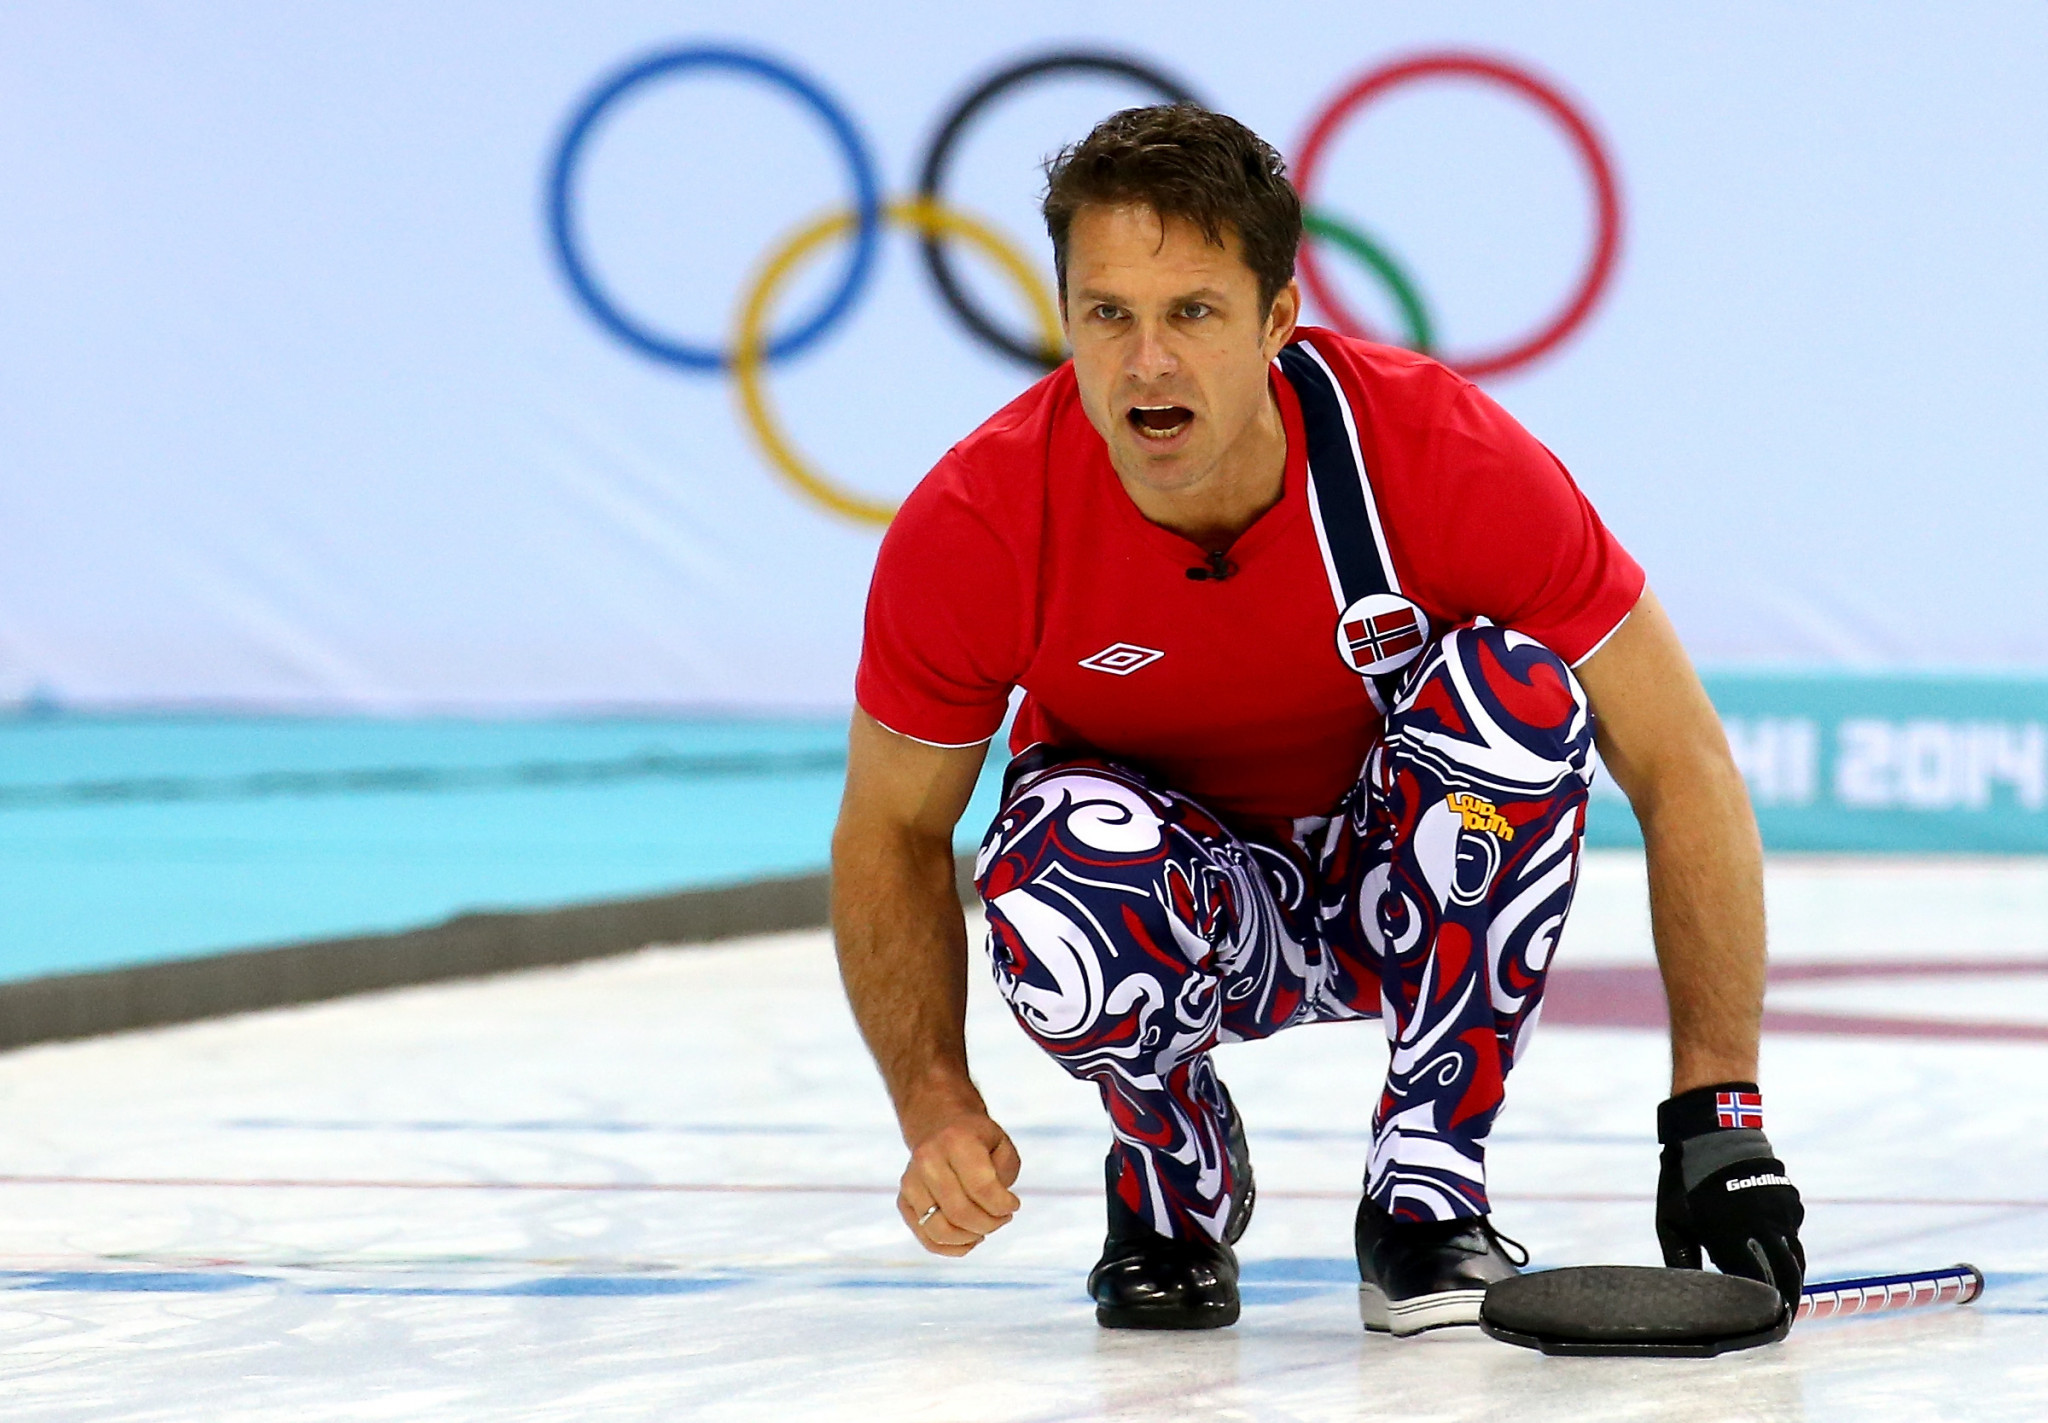 Norwegian curler Thomas Ulsrud, who won silver at the Vancouver 2010 Winter Olympics and world gold in 2014, has died aged 50 ©Getty Images